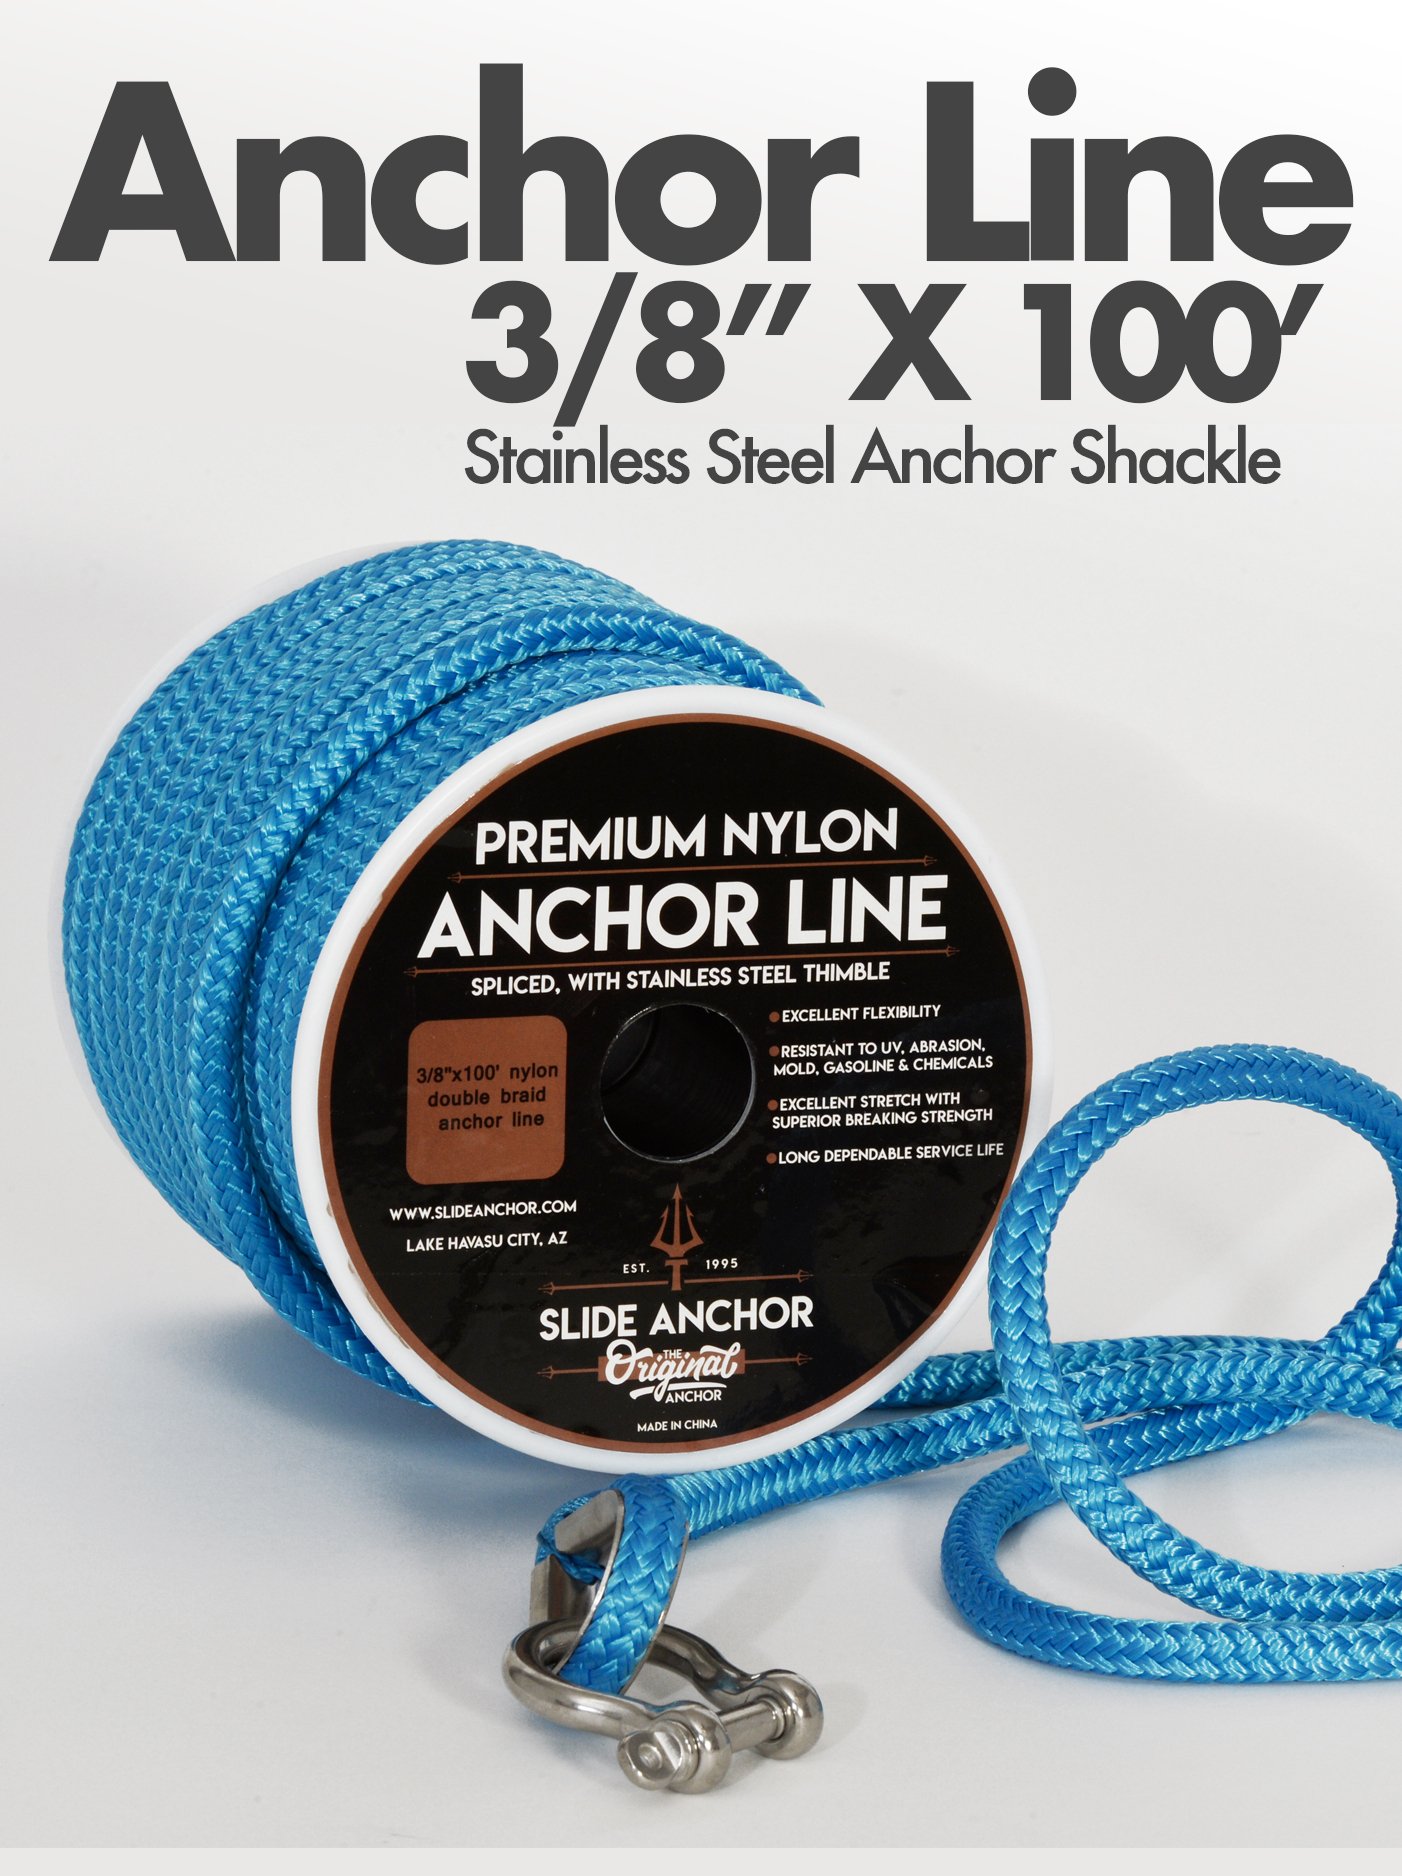 INNOCEDEAR Anchor Rope Braided Anchor Line(Navy, 3/8 x 100') Premium Solid  Braid MFP Boat Rope with Stainless Steel Thimble, Quality Marine Rope, Boat  Accessories